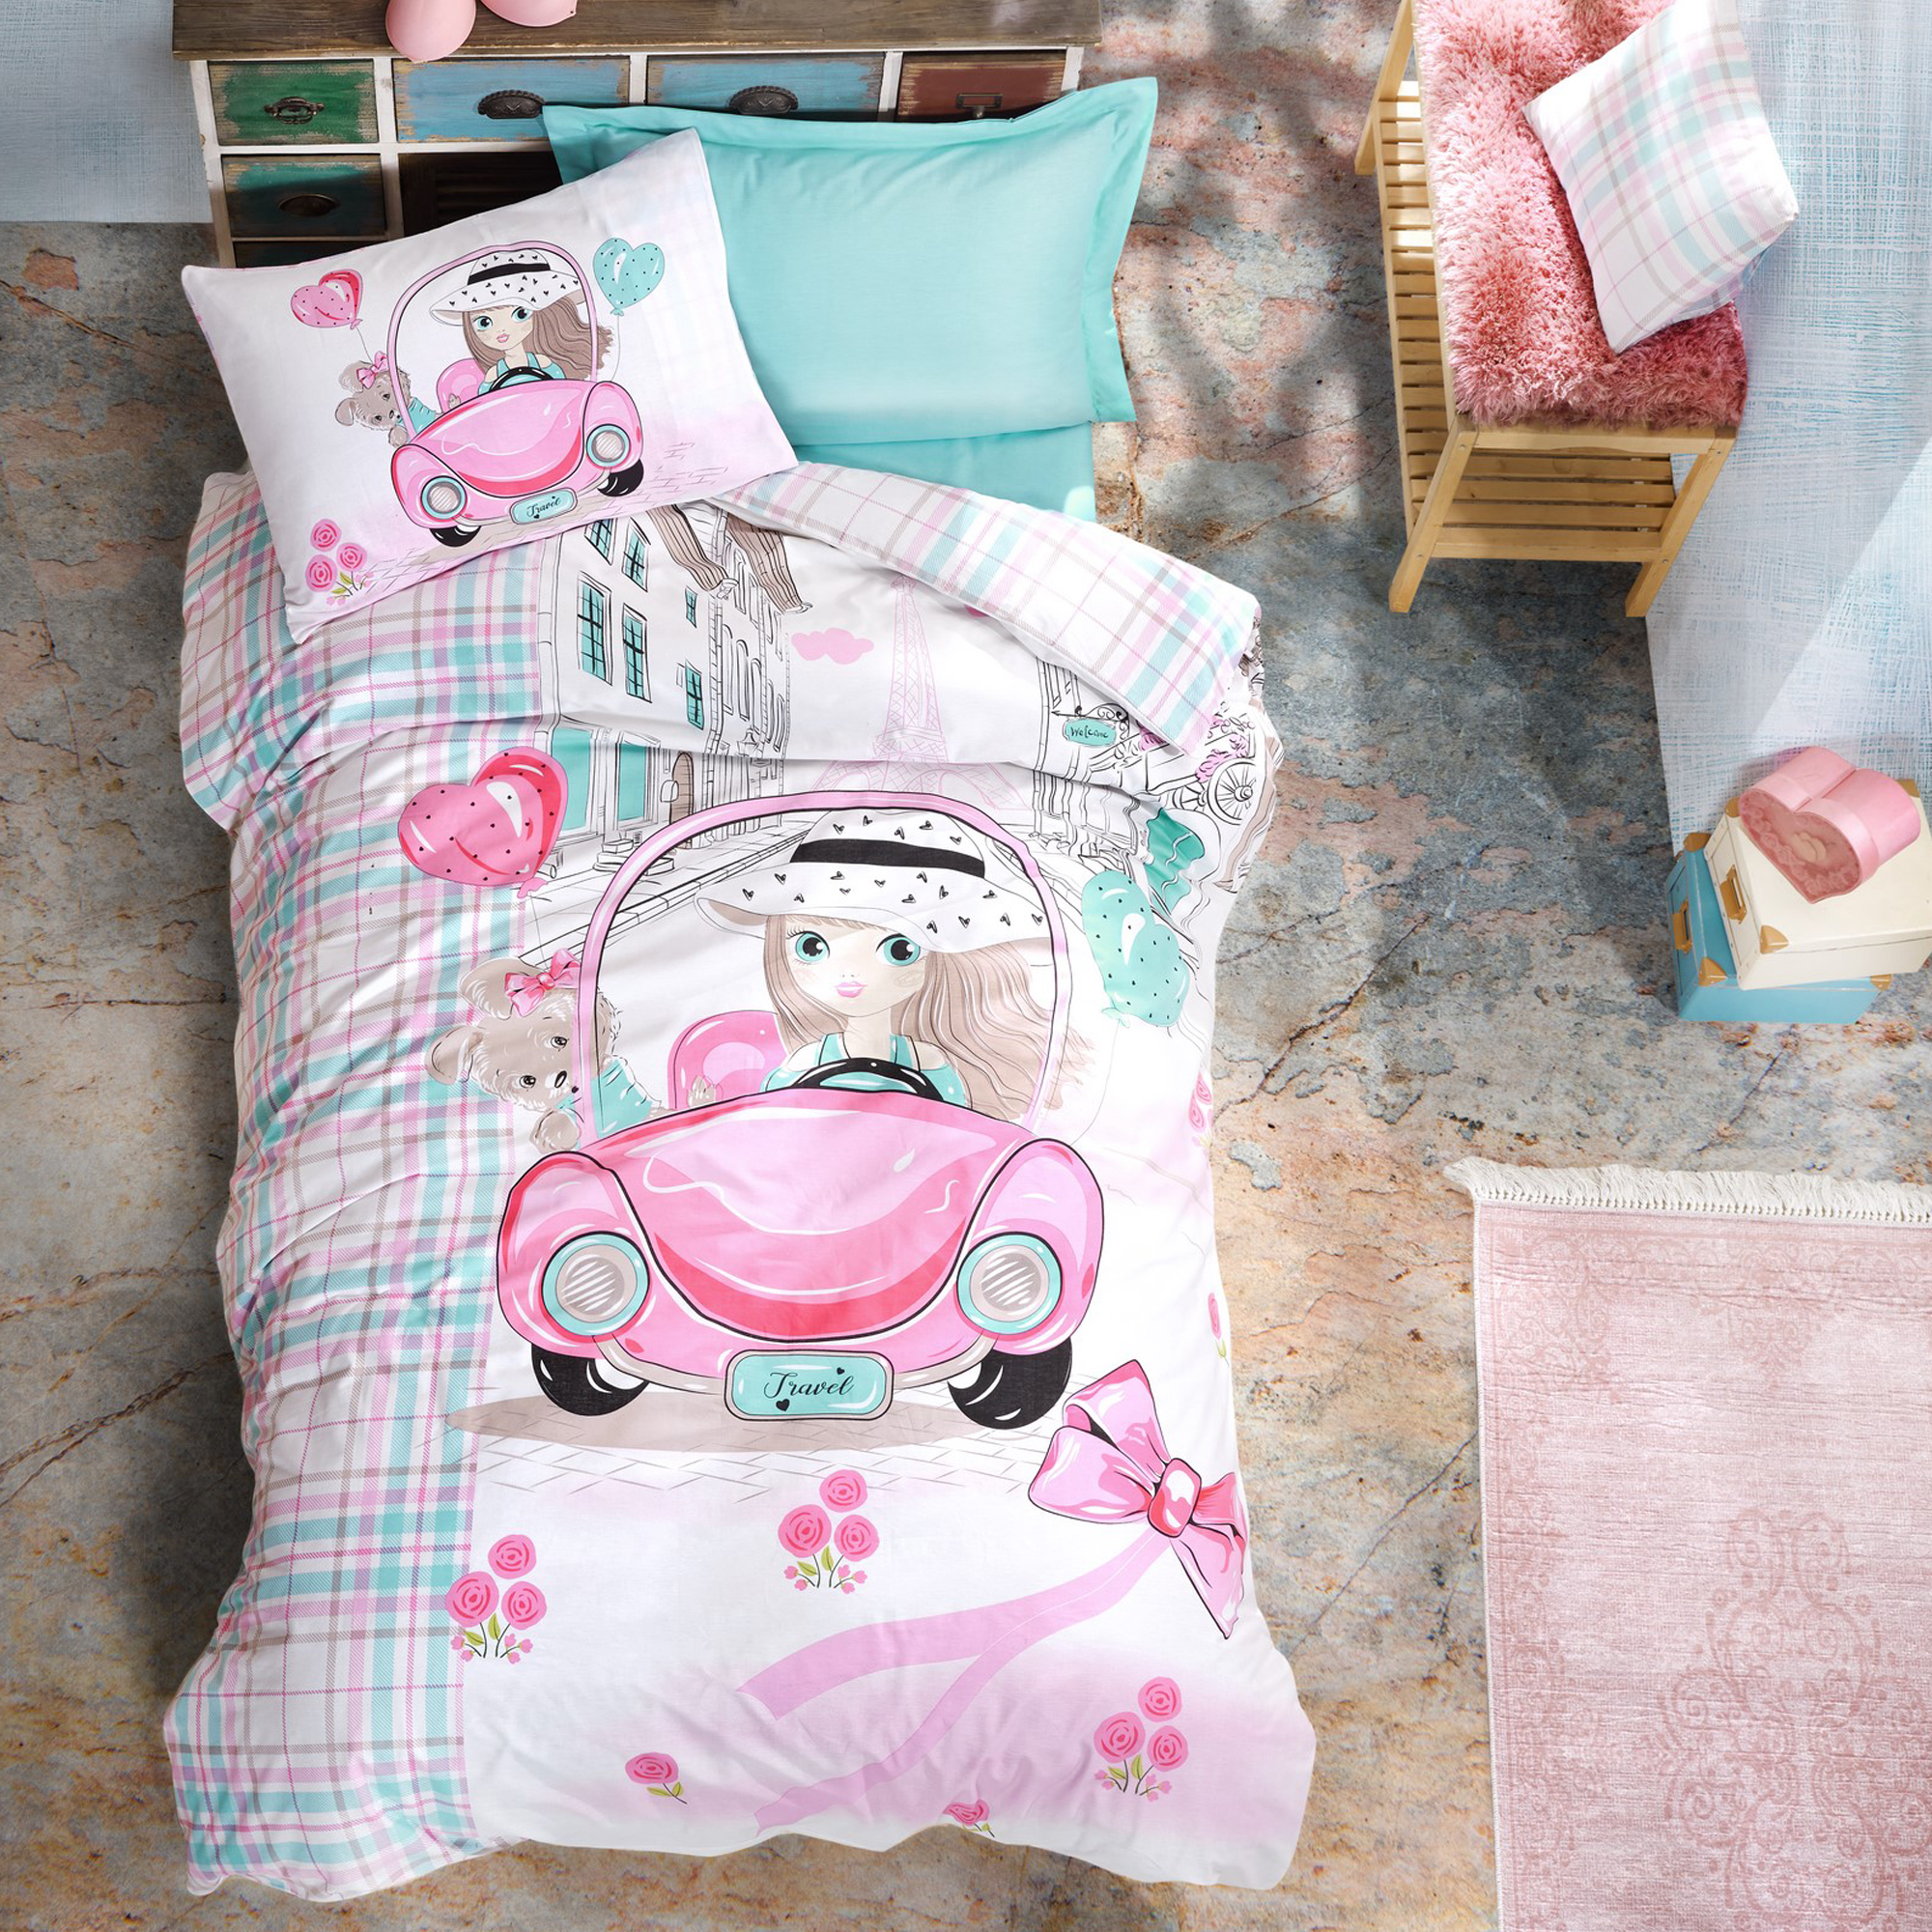 Sussexhome Pink Car Duvet Cover Set, Twin Size Duvet Cover, 1 Duvet Cover, 1 Fitted Sheet and 2 Pillowcases